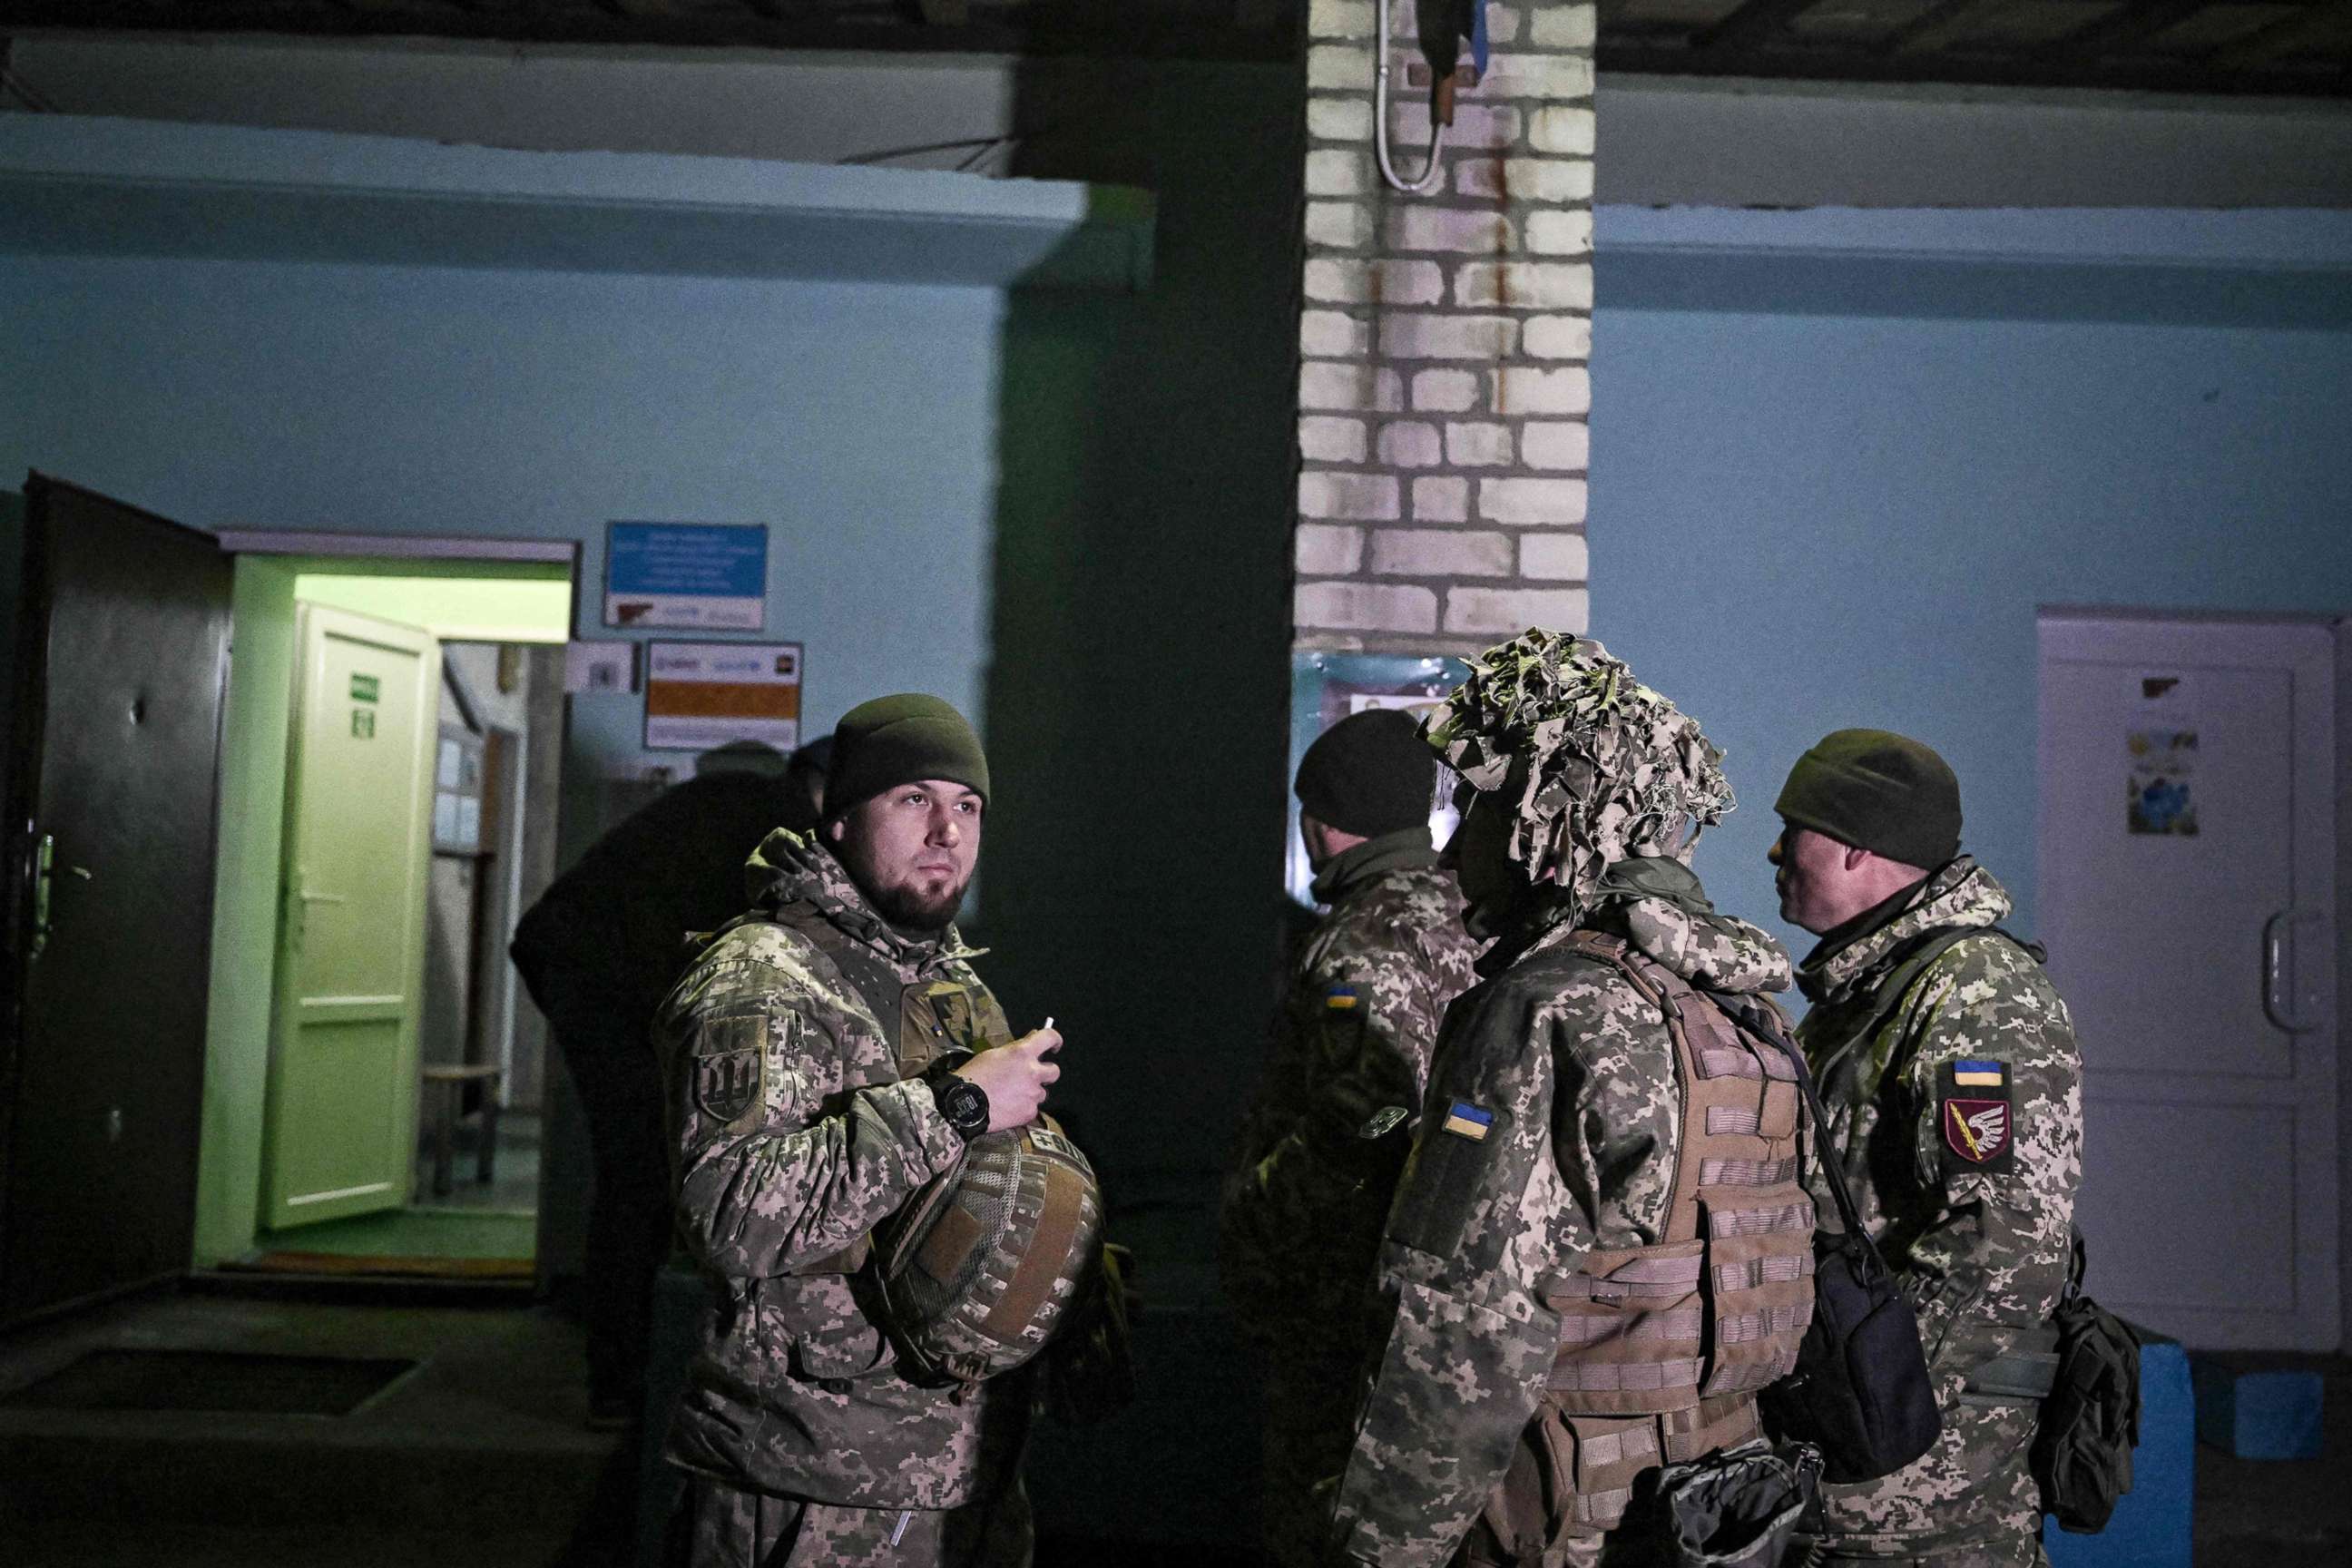 PHOTO: Ukrainian soldiers stand guard outside the building after the reported shelling of a kindergarden in the settlement of Stanytsia Luhanska, Ukraine, on Feb. 17, 2022.